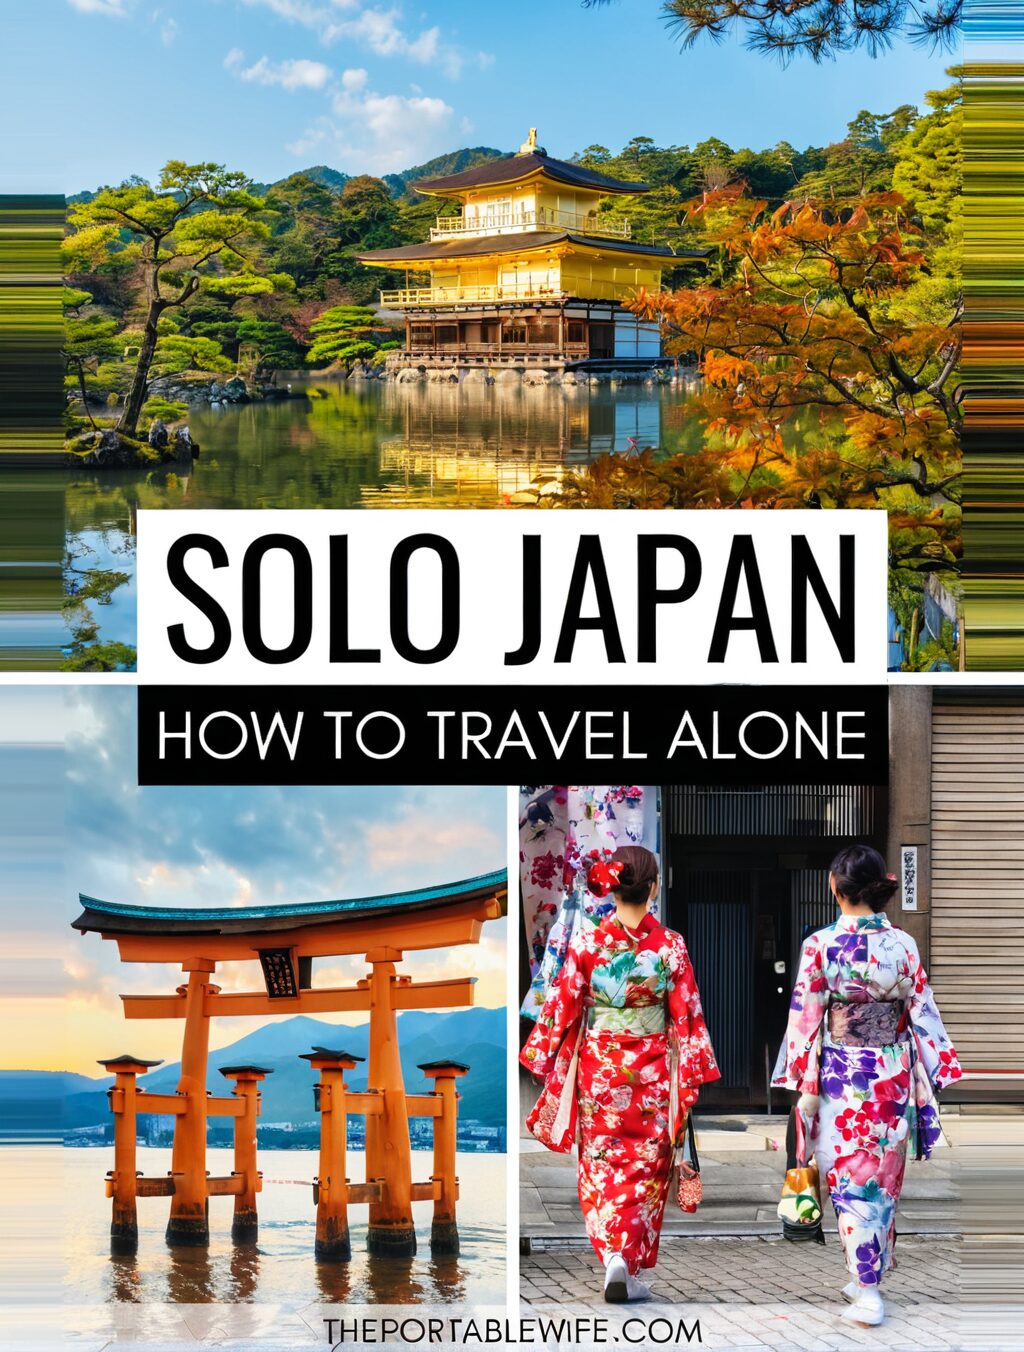 solo female travel japan itinerary